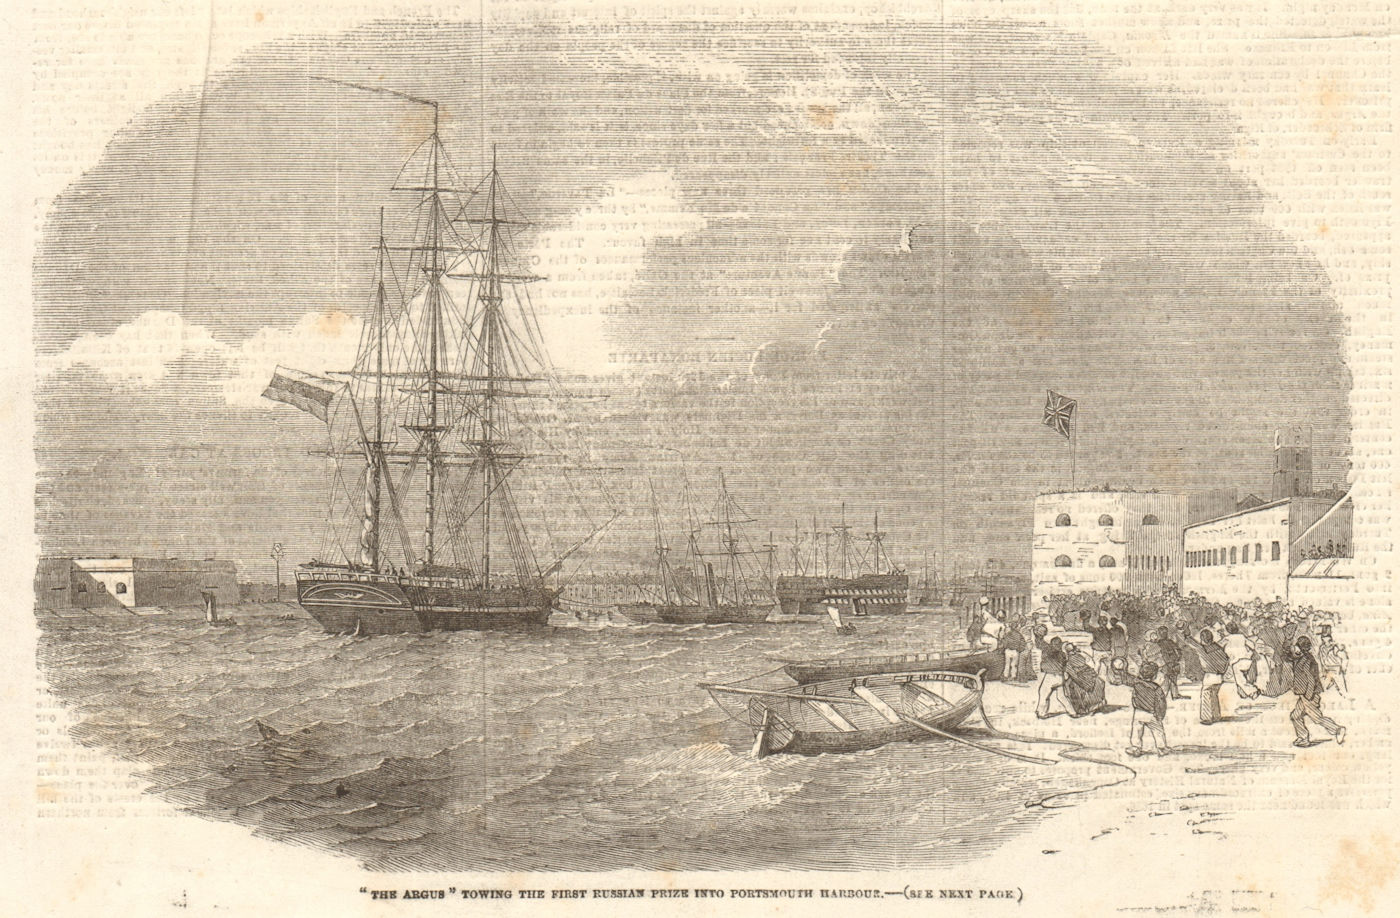 The Argus towing a Russian prize into Portsmouth harbour. Hampshire. Ships 1854